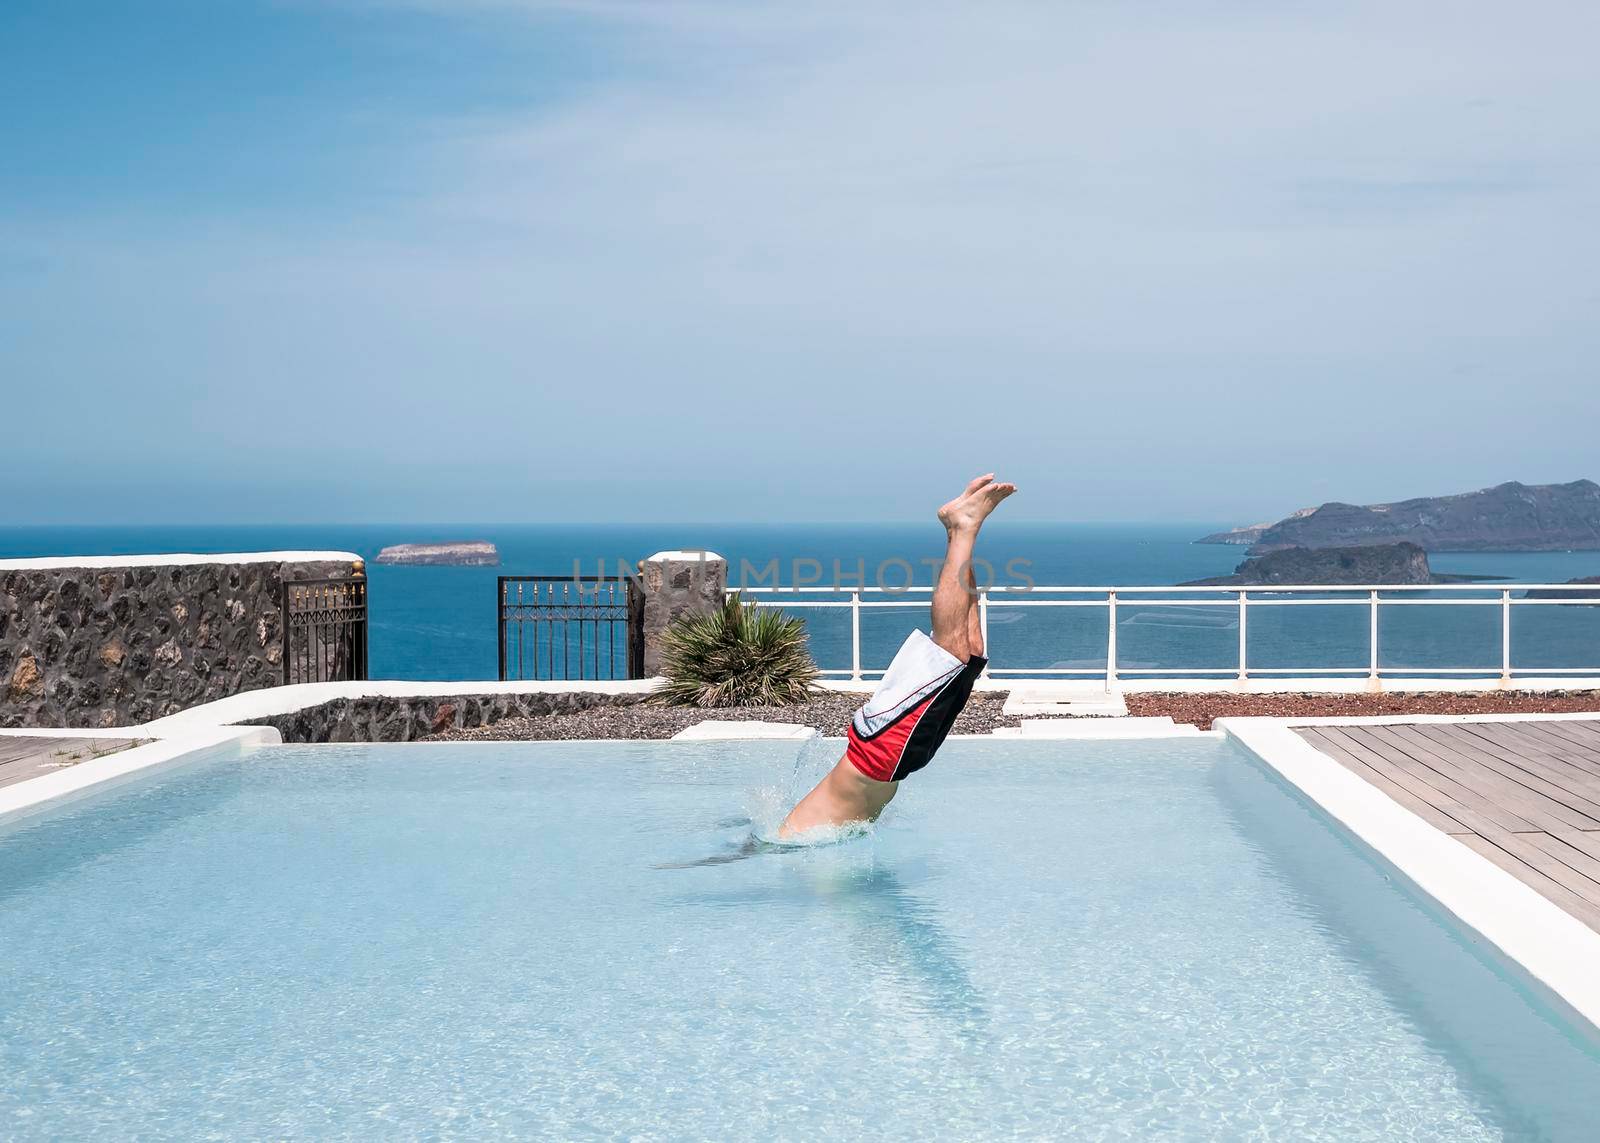 Man diving into a swimming pool in a villa.